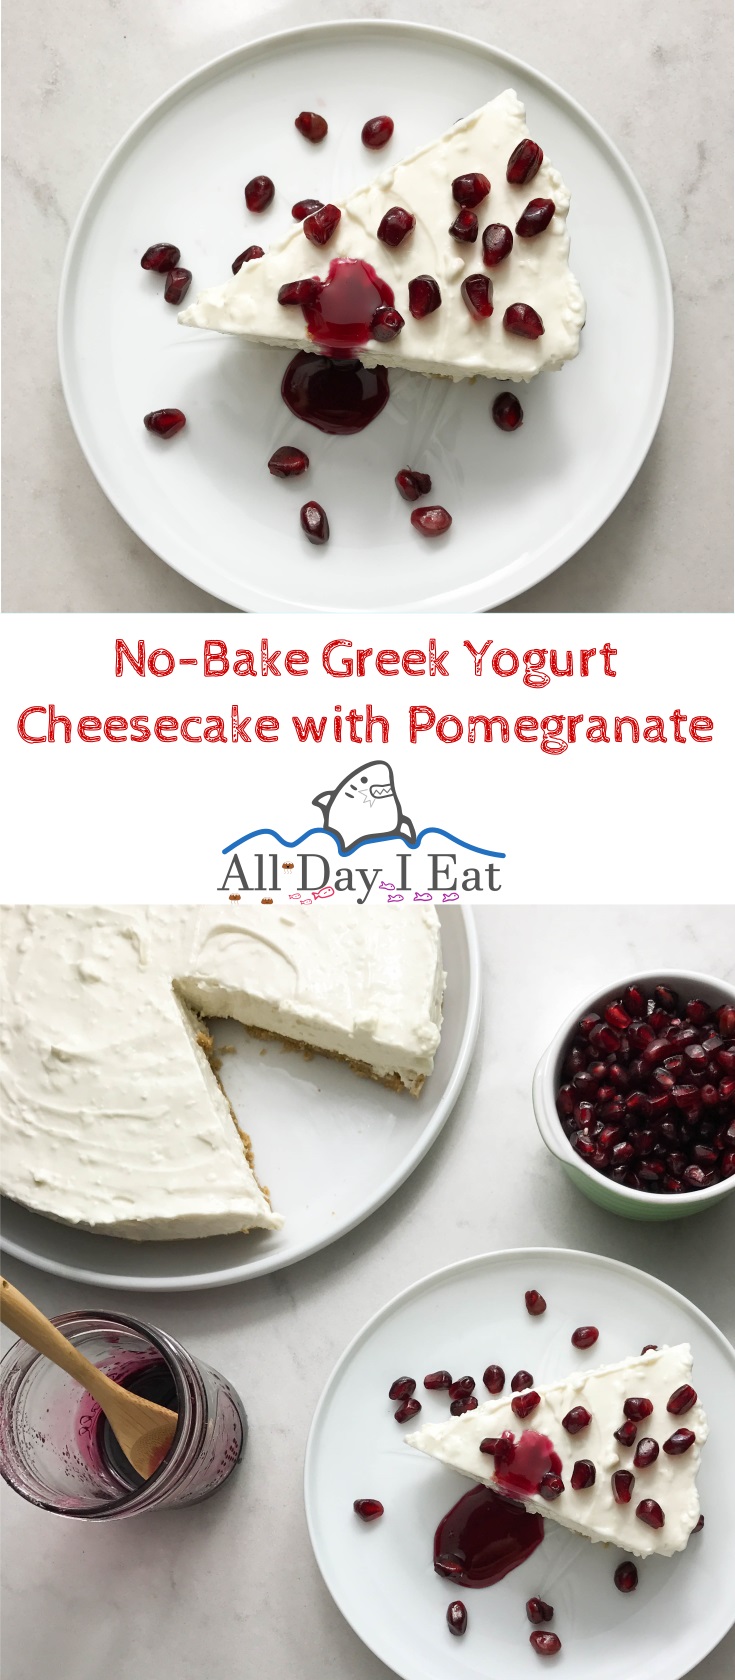 No-Bake Greek Yogurt Cheesecake with Pomegranate so good you'll want to eat it all up yourself!